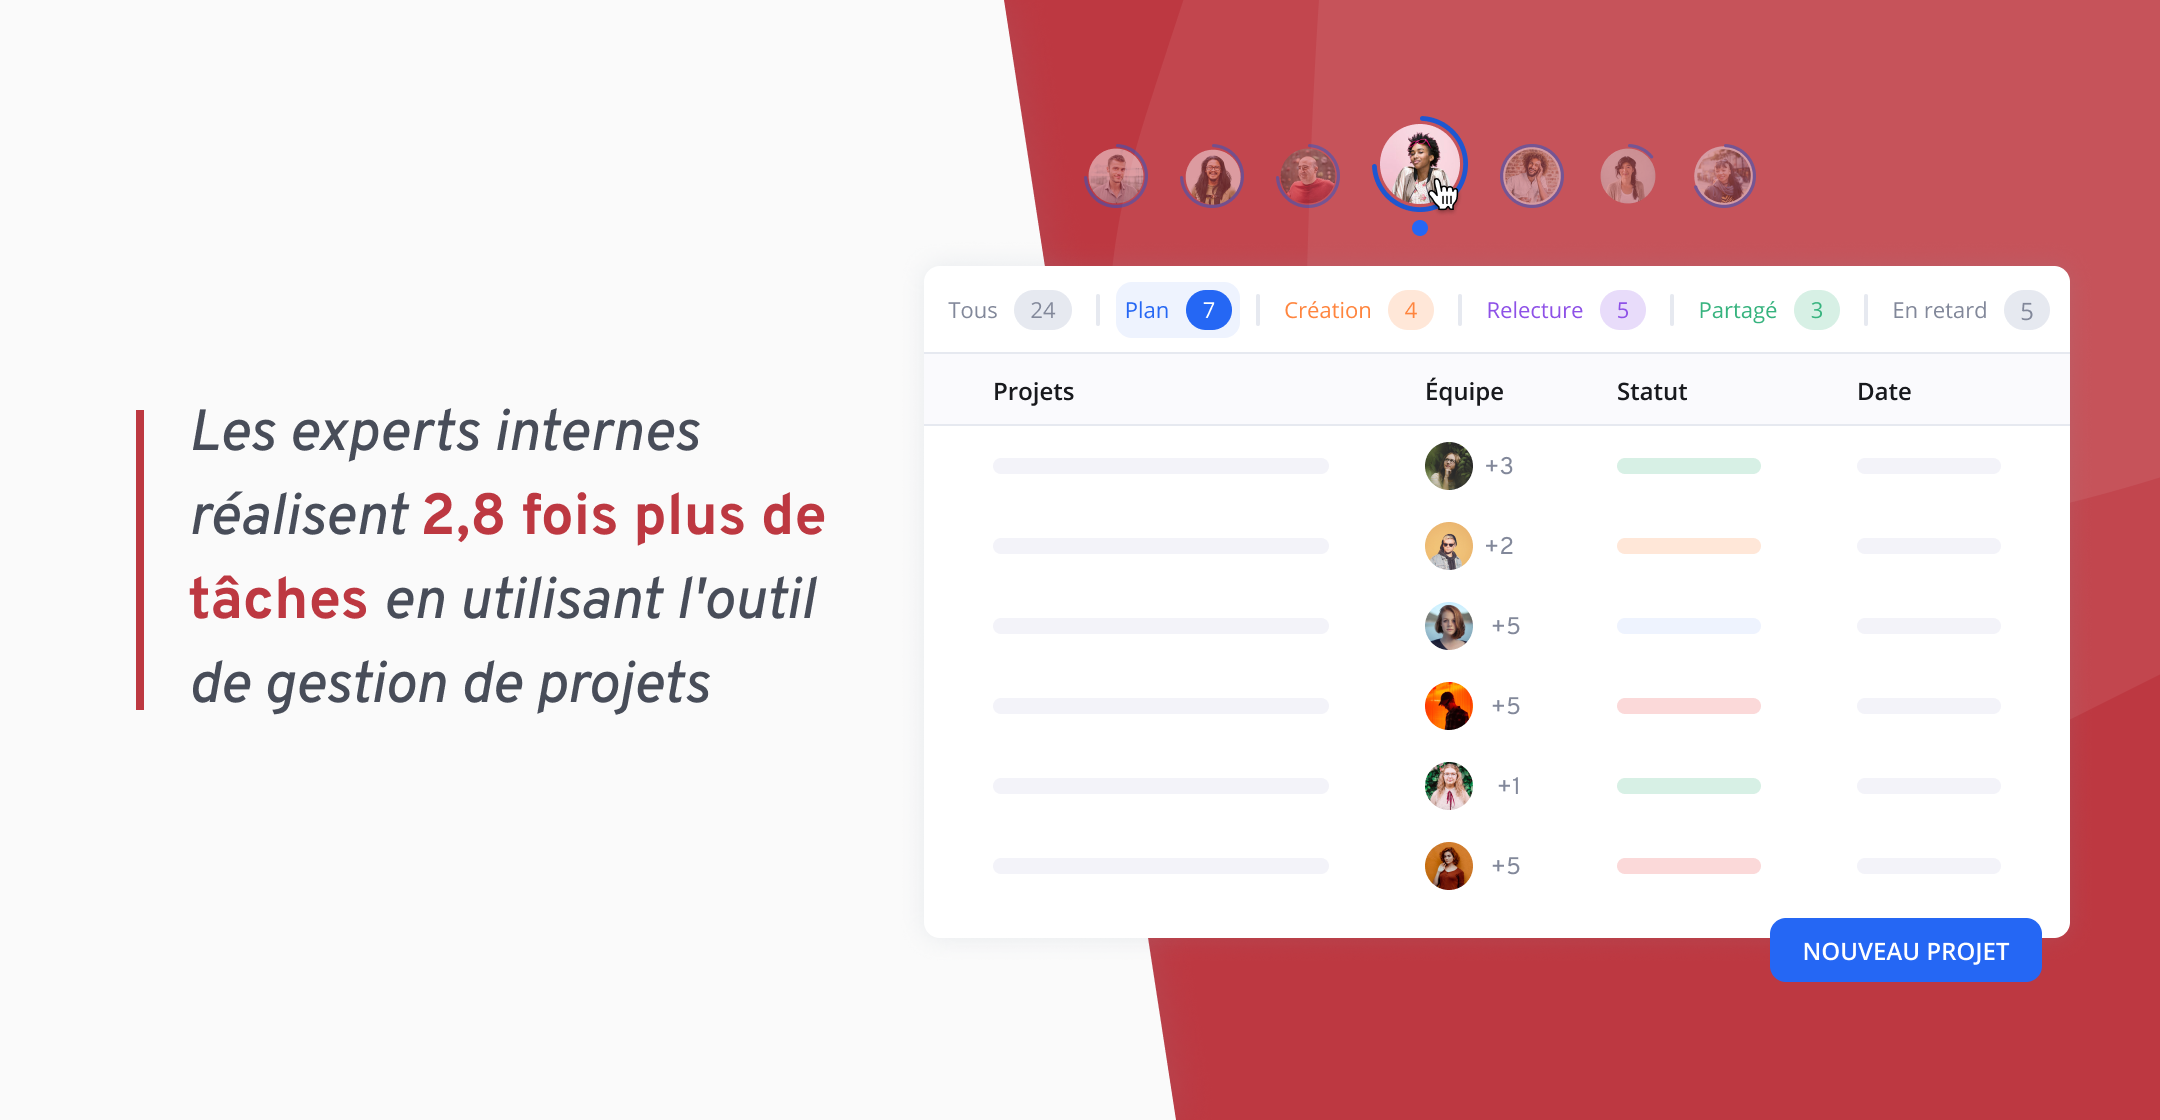 Projets-3-moyens-developper-collaborative-learning | 360Learning